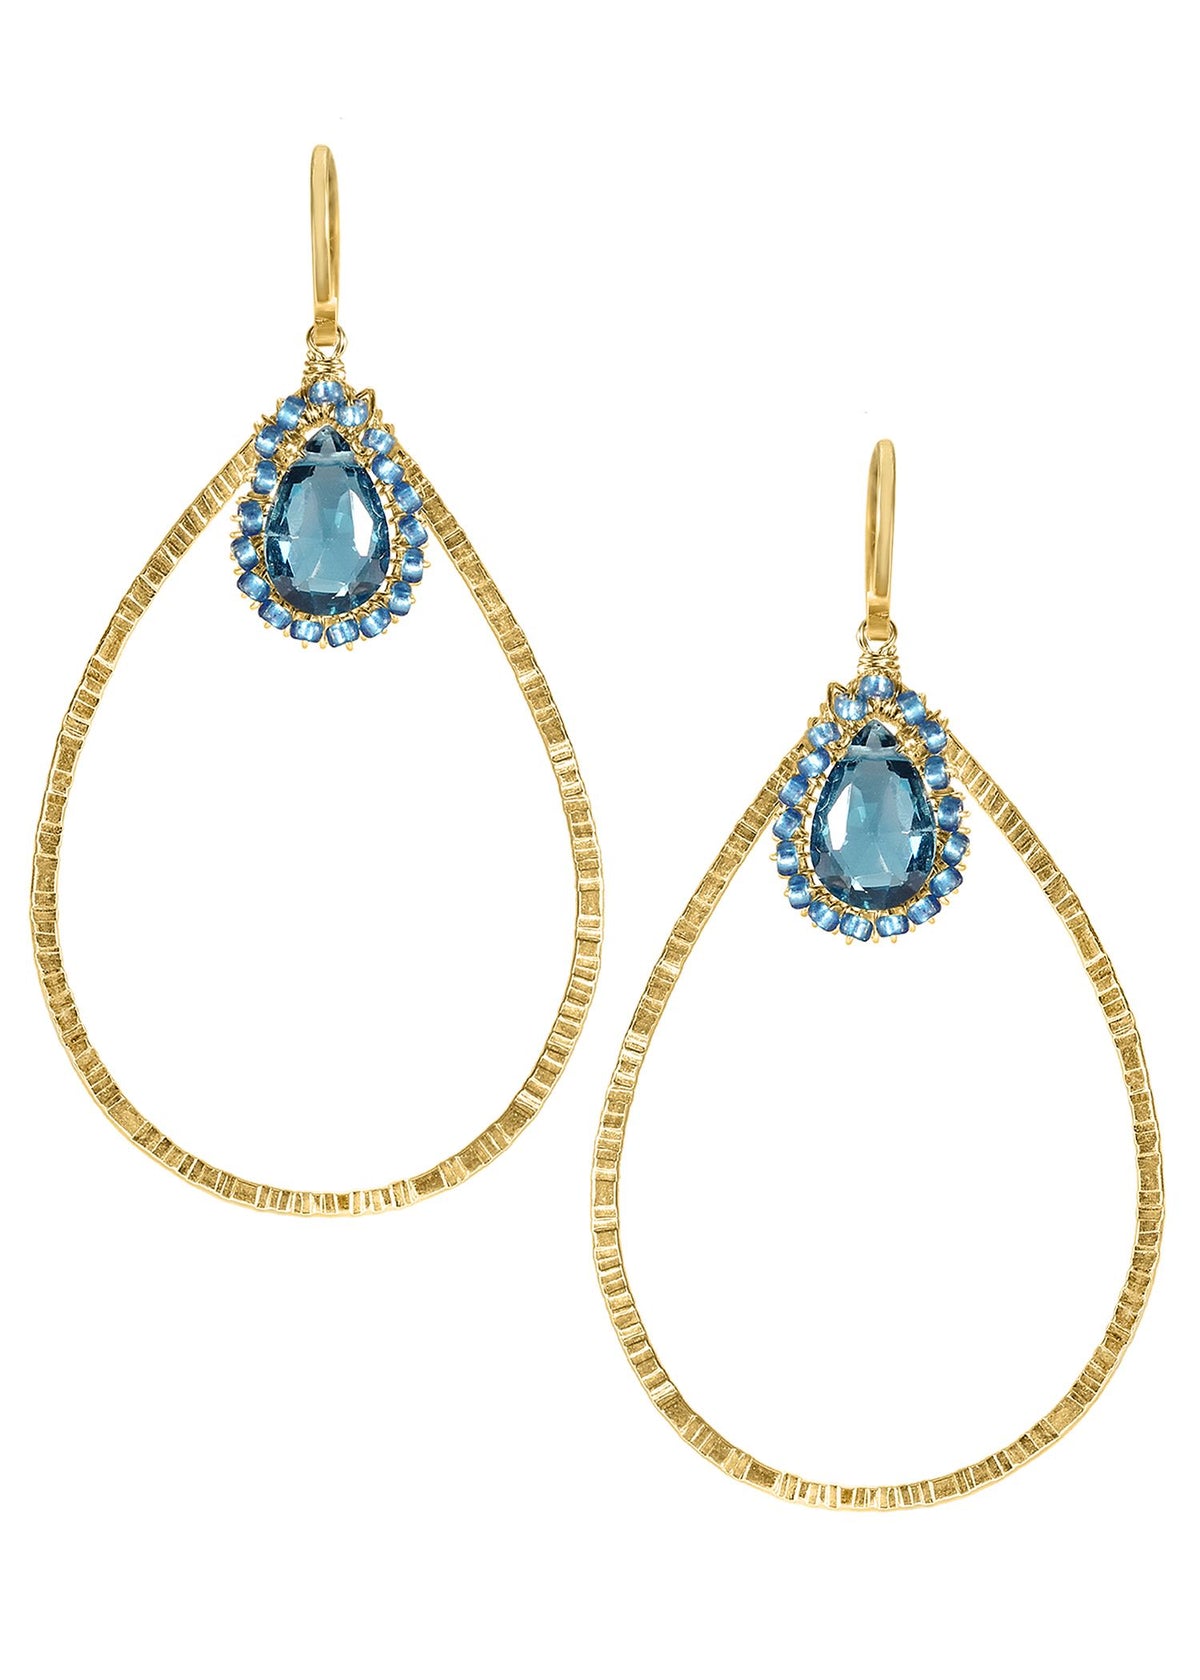 London blue quartz 14k gold fill Earrings measure 2&quot; in length (including the ear wires) and 1-1/8&quot; in width Handmade in our Los Angeles studio